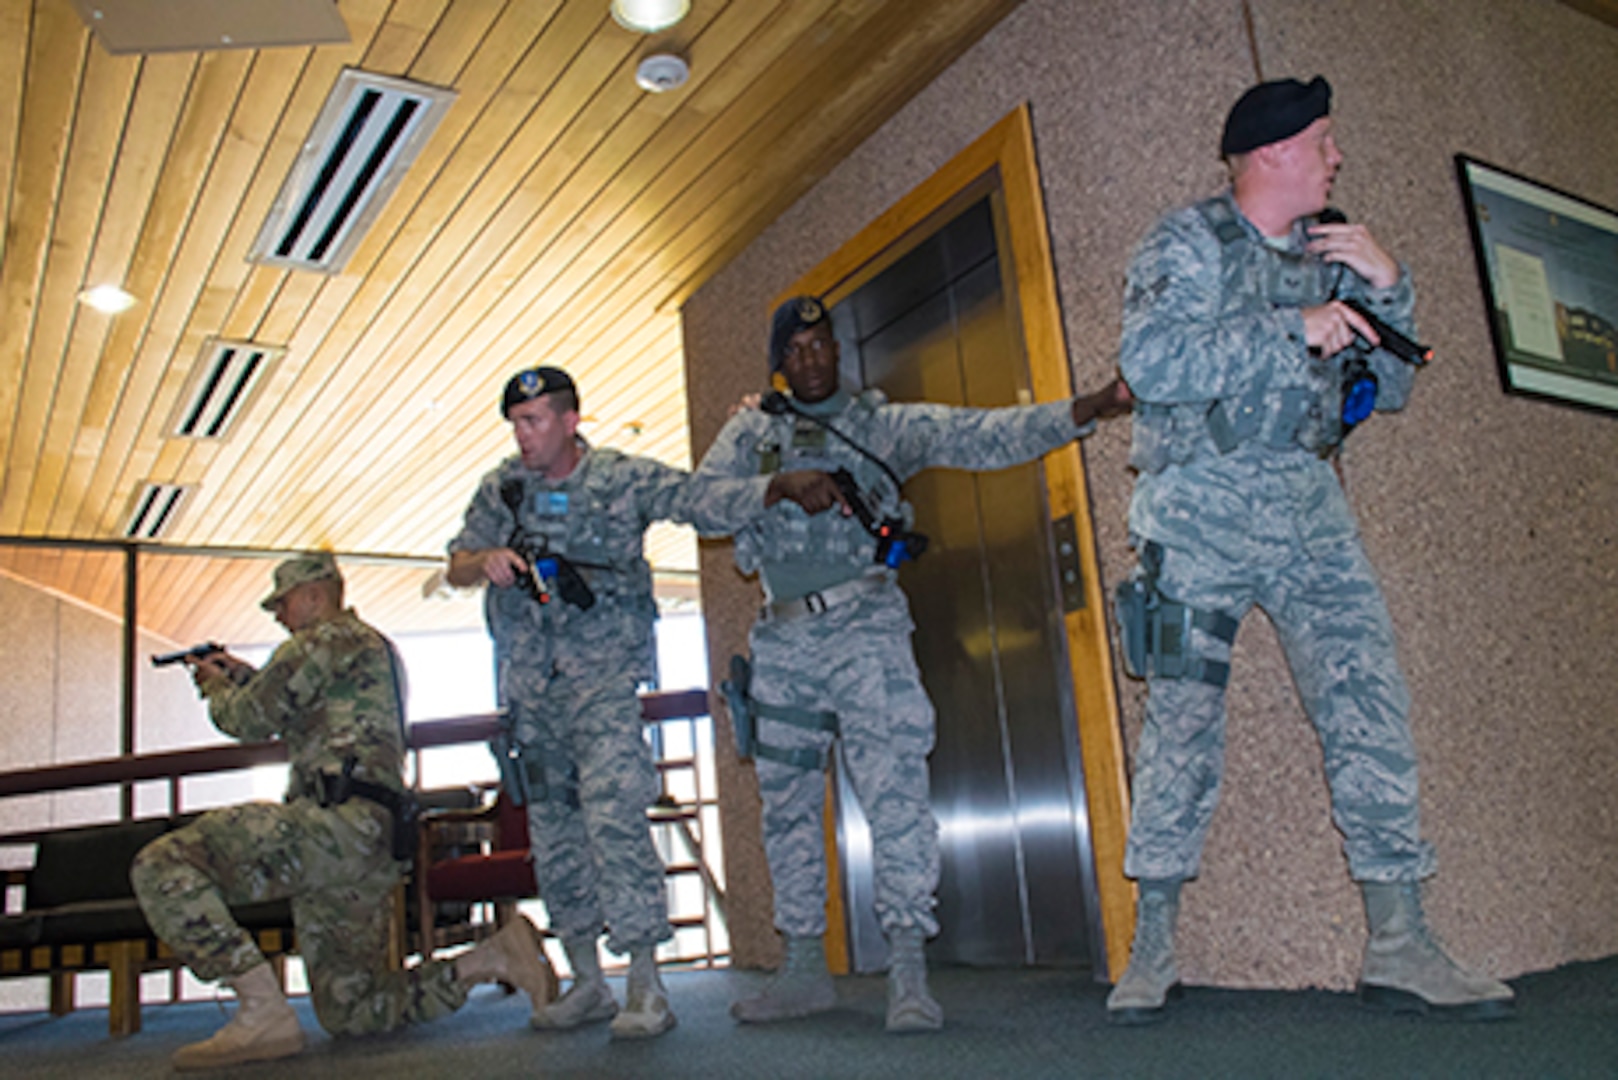 Members of the Colorado National Guard, South Metro Fire Rescue and the Arapahoe County Sheriffs Office perform active threat training at Joint Force Headquarters, Centennial, Colo., August 25, 2017.  This training aids the CONG and partner organizations in preparation to response to potential real world incidents and educates Department of Military and Veterans Affairs employees on survival tactics. (U.S. Army National Guard photo by Staff Sgt. Joseph K. VonNida)